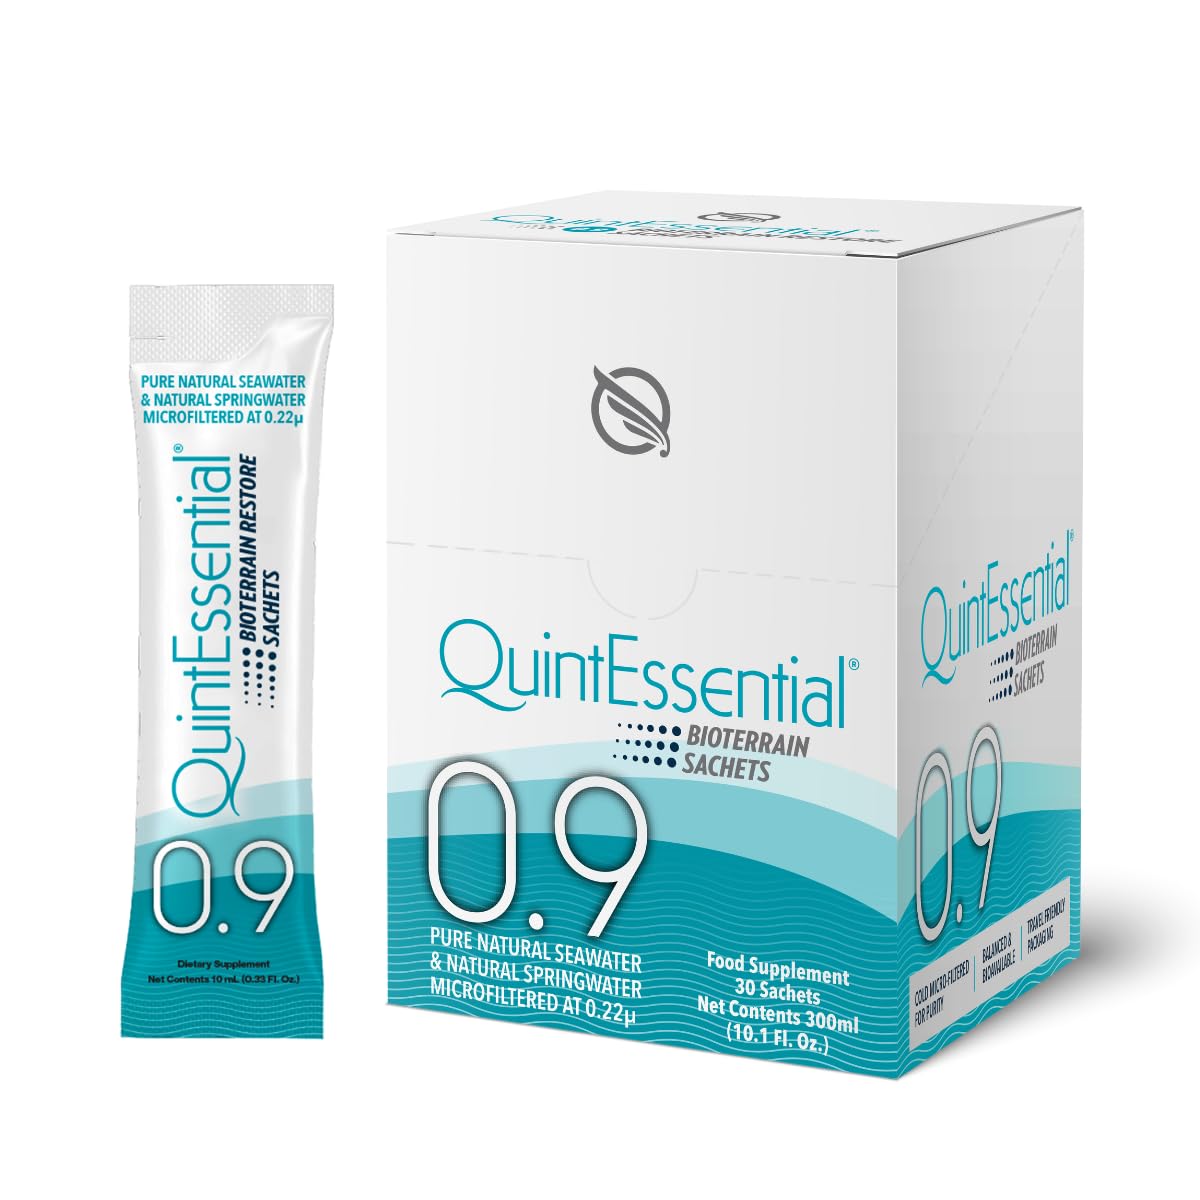 Quicksilver Scientific Quintessential 0.9 Sachets - Isotonic Solution with Sea Water Minerals + Alpine Spring Water - Liquid Hydration, Electrolyte + Multi Minerals Supplement (30 Count)